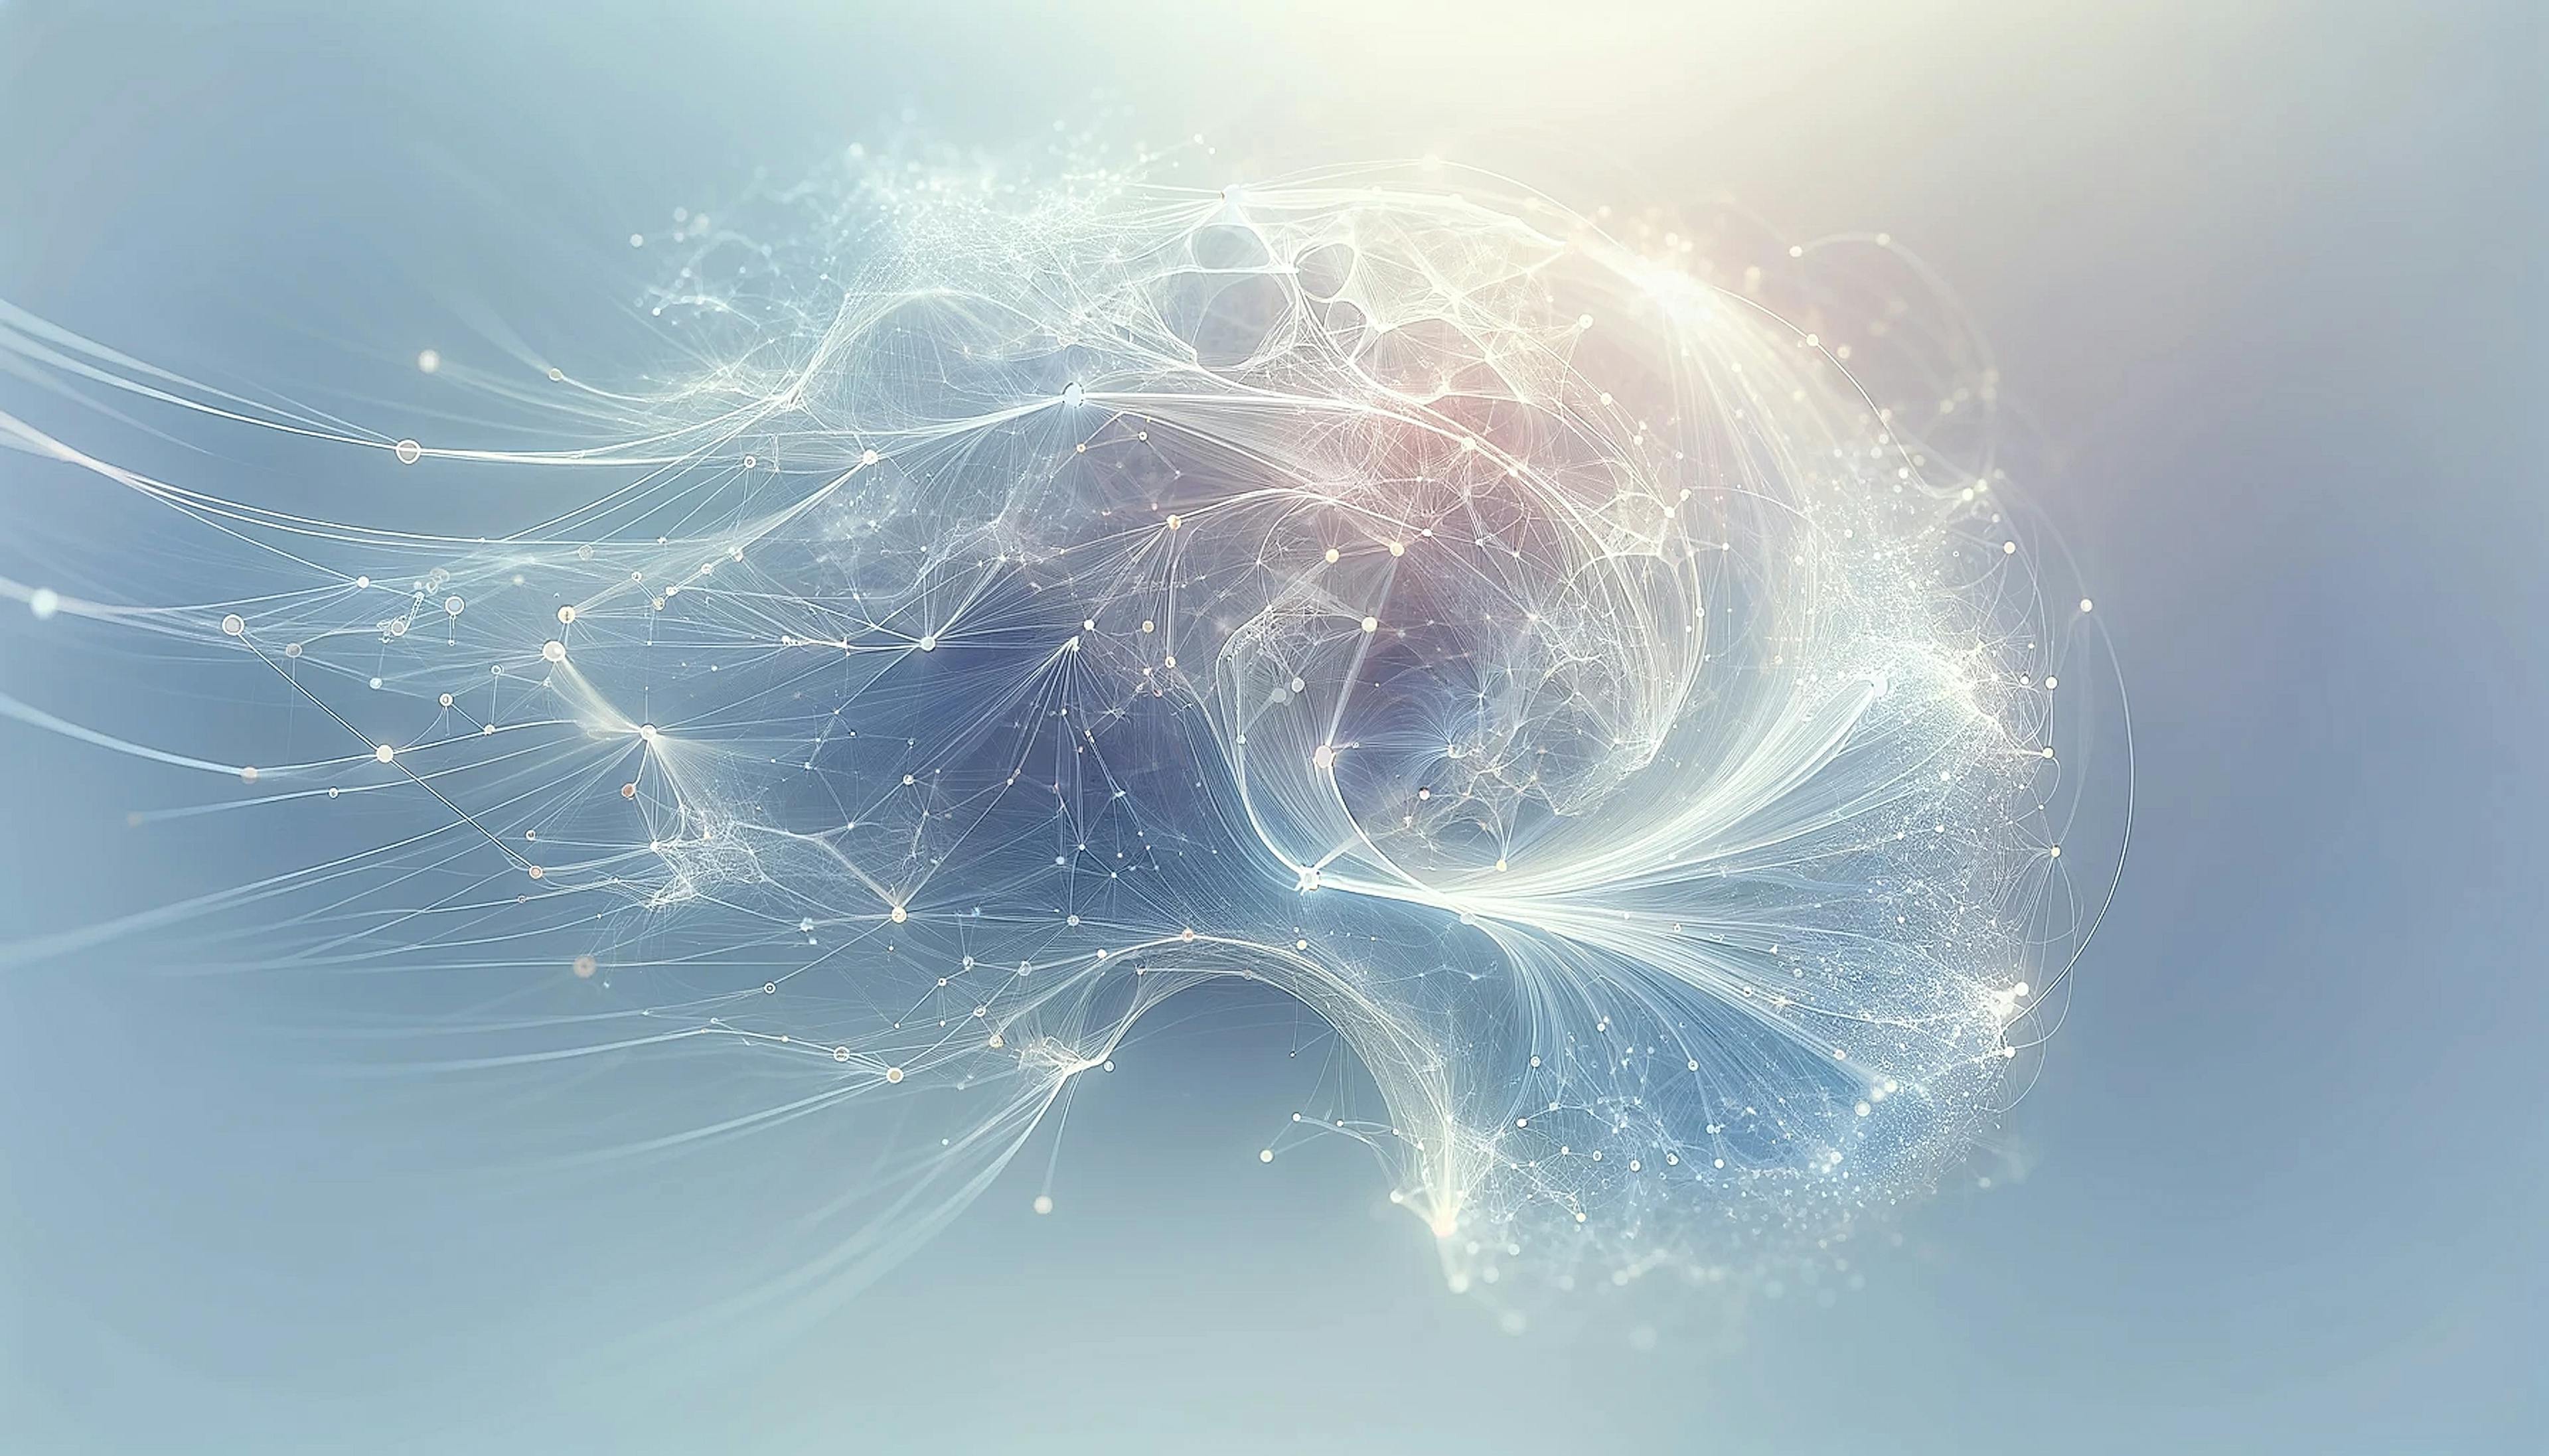 An ethereal abstract representation of artificial intelligence, featuring thin flowing lines and sparse nodes connected by faint paths